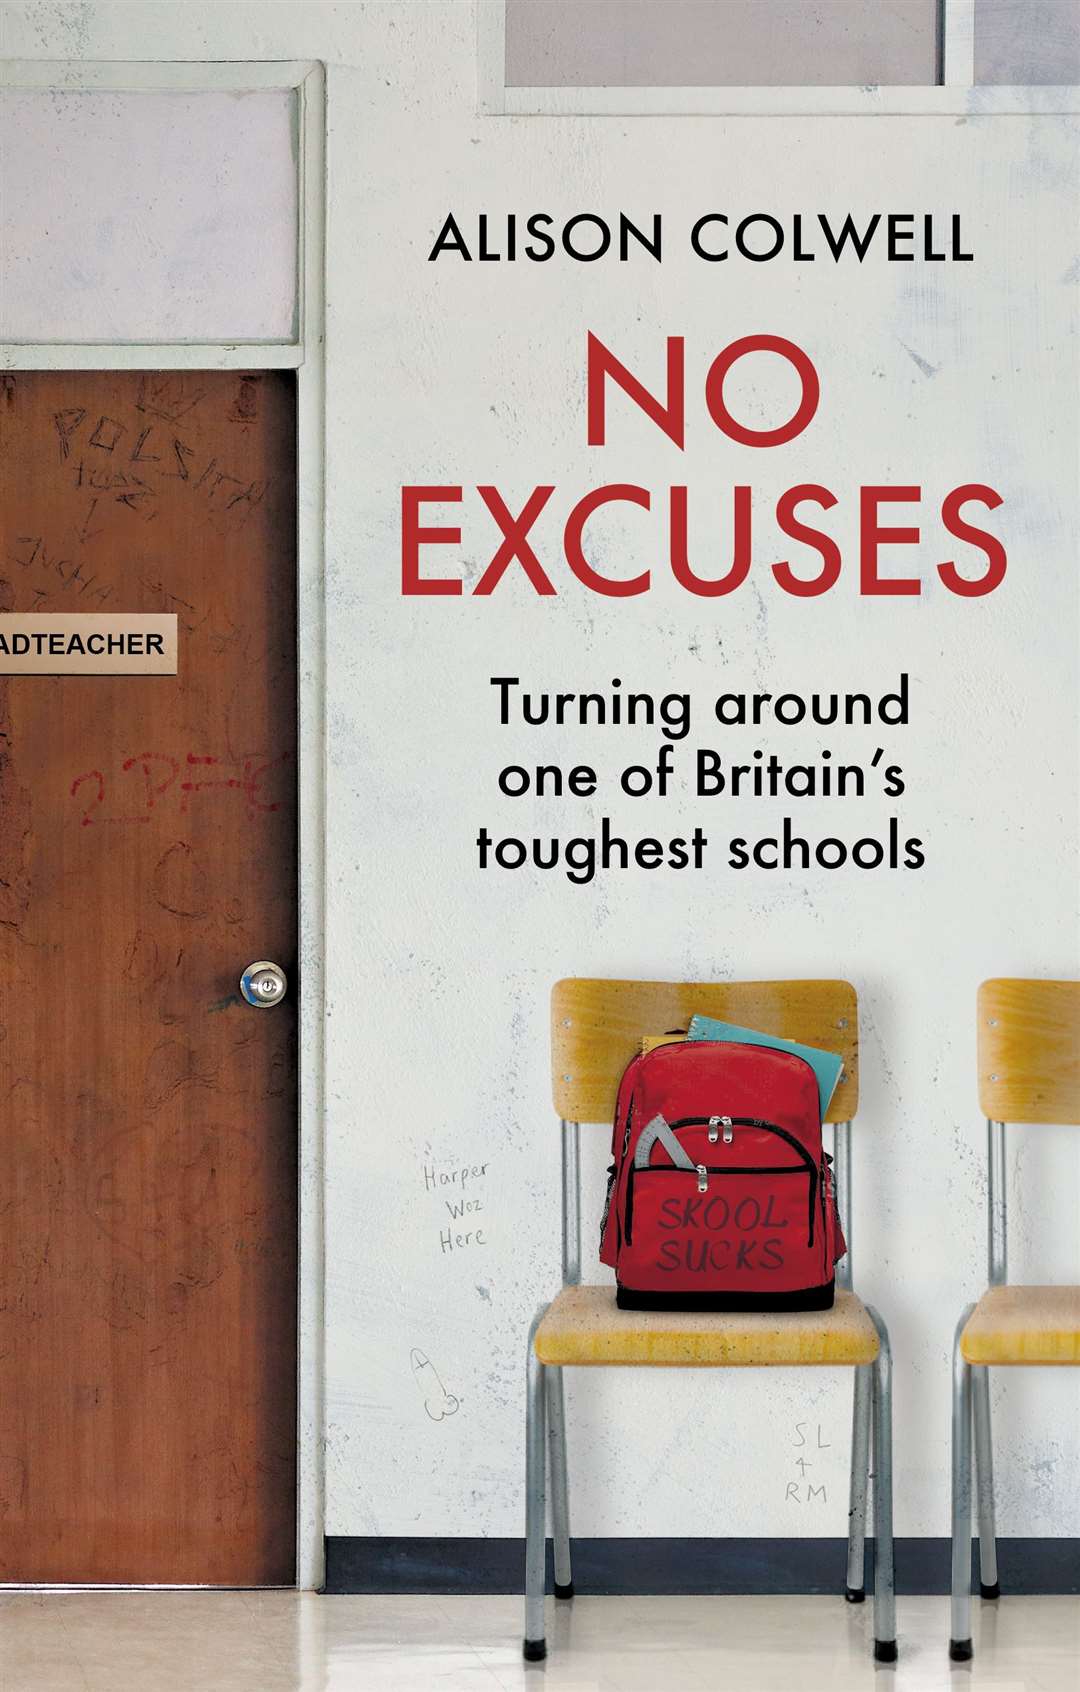 No Excuses by Alison Colwell draws on real experiences from the classroom and beyond